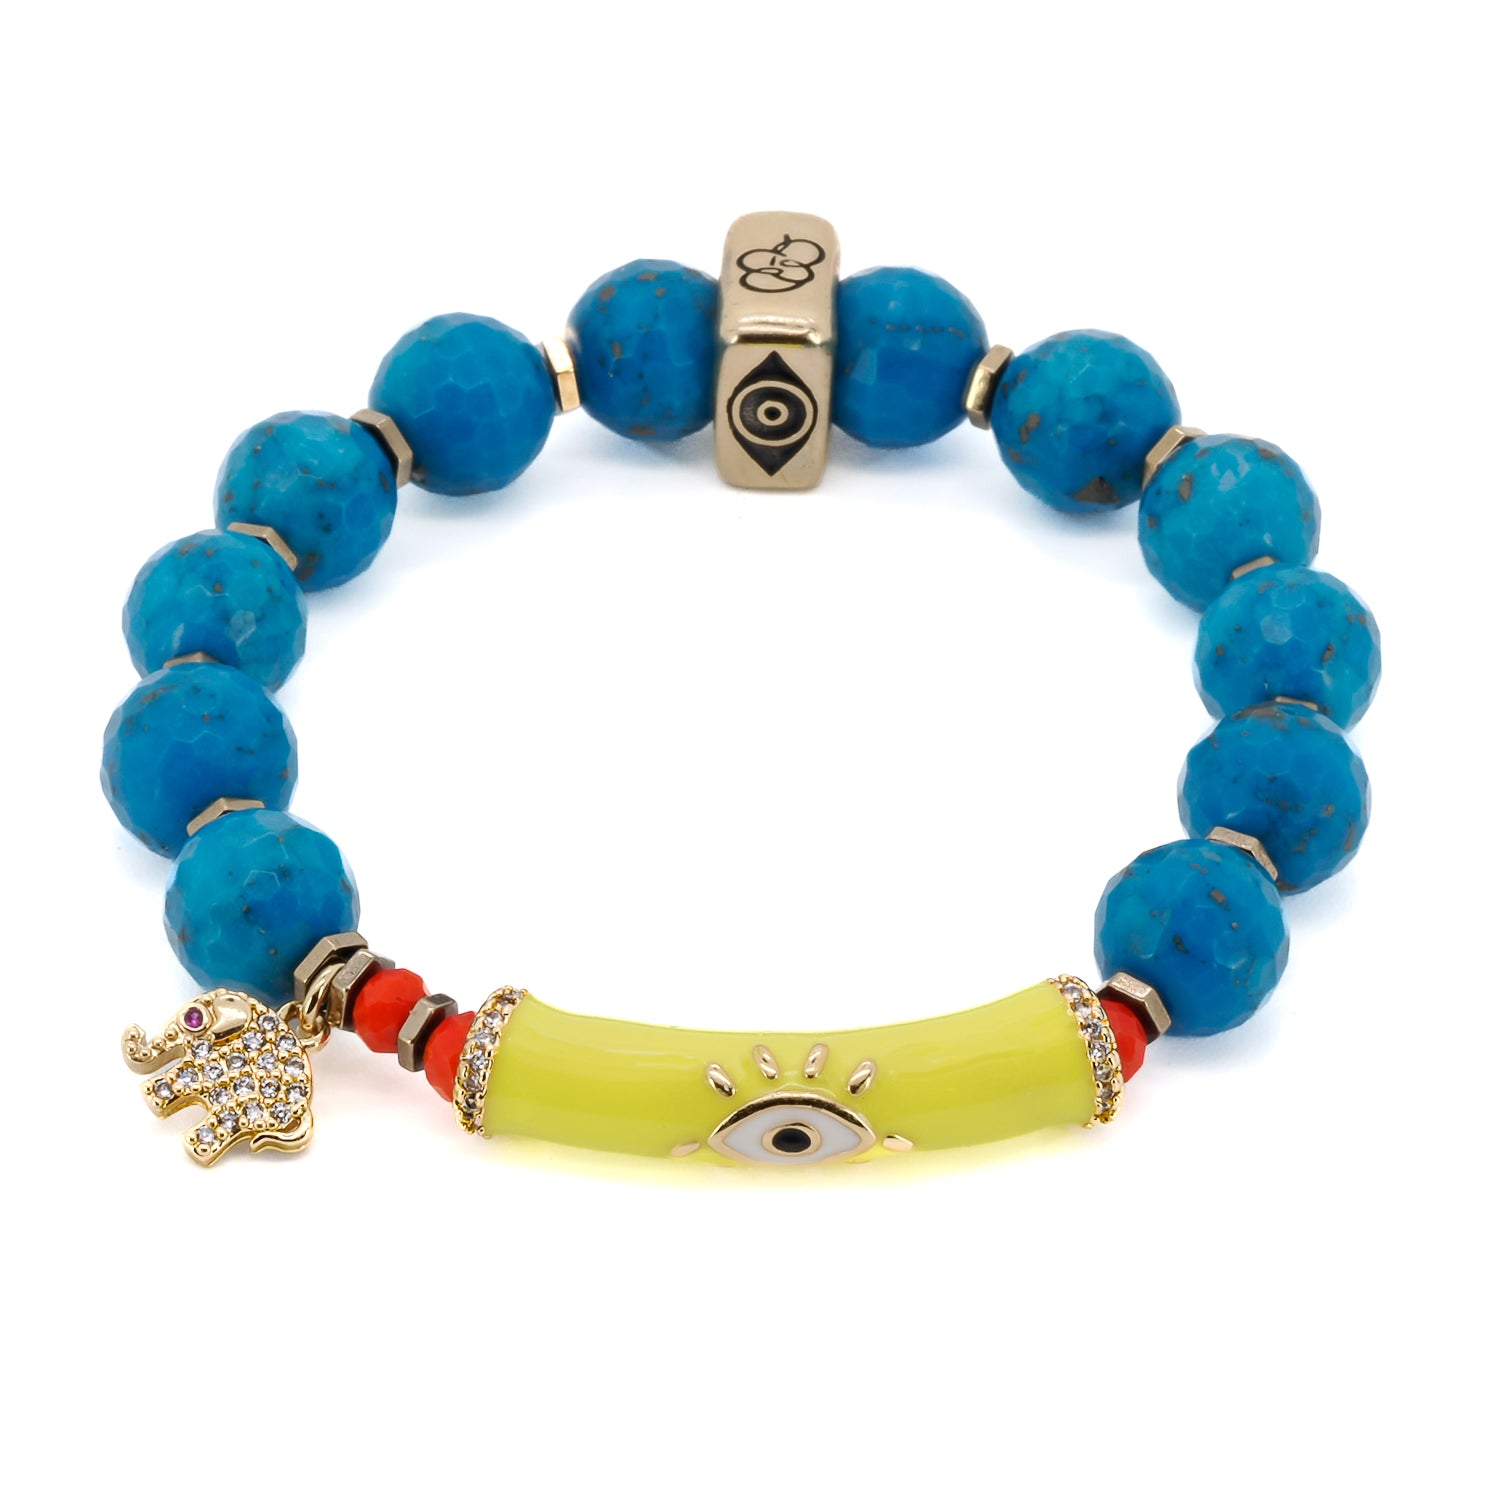 Embrace protection and unique style with the Turquoise Unique Protection Bracelet, featuring powerful symbols and natural turquoise stones.